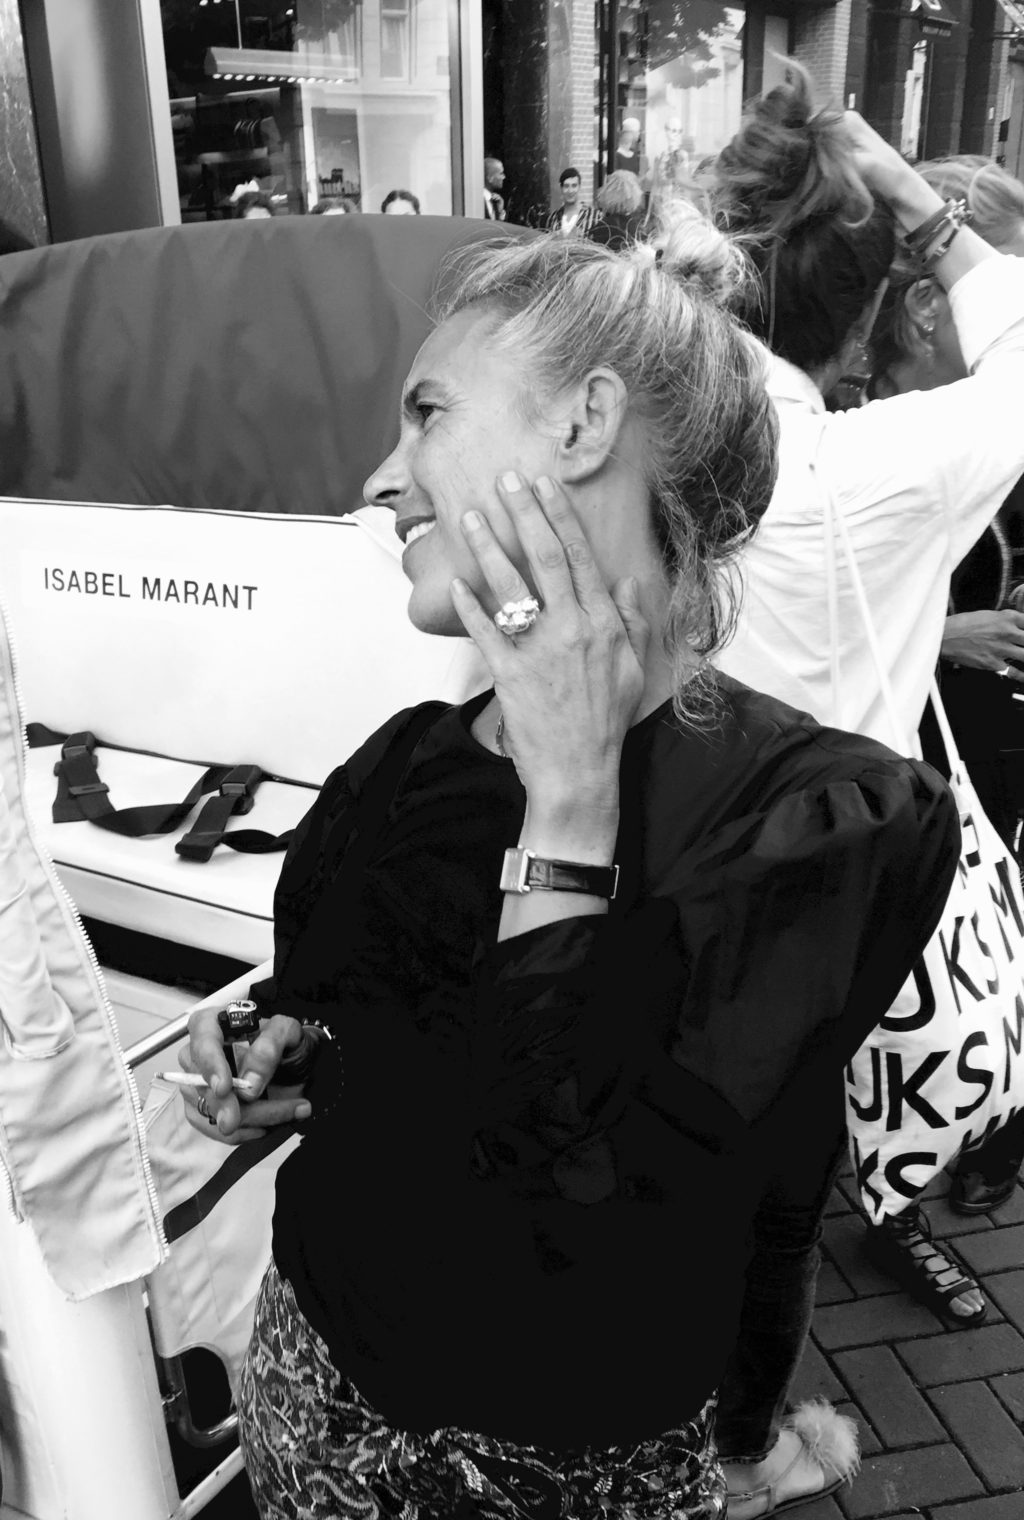 Isabel Marant wering the Colette ring by Pit Bomans